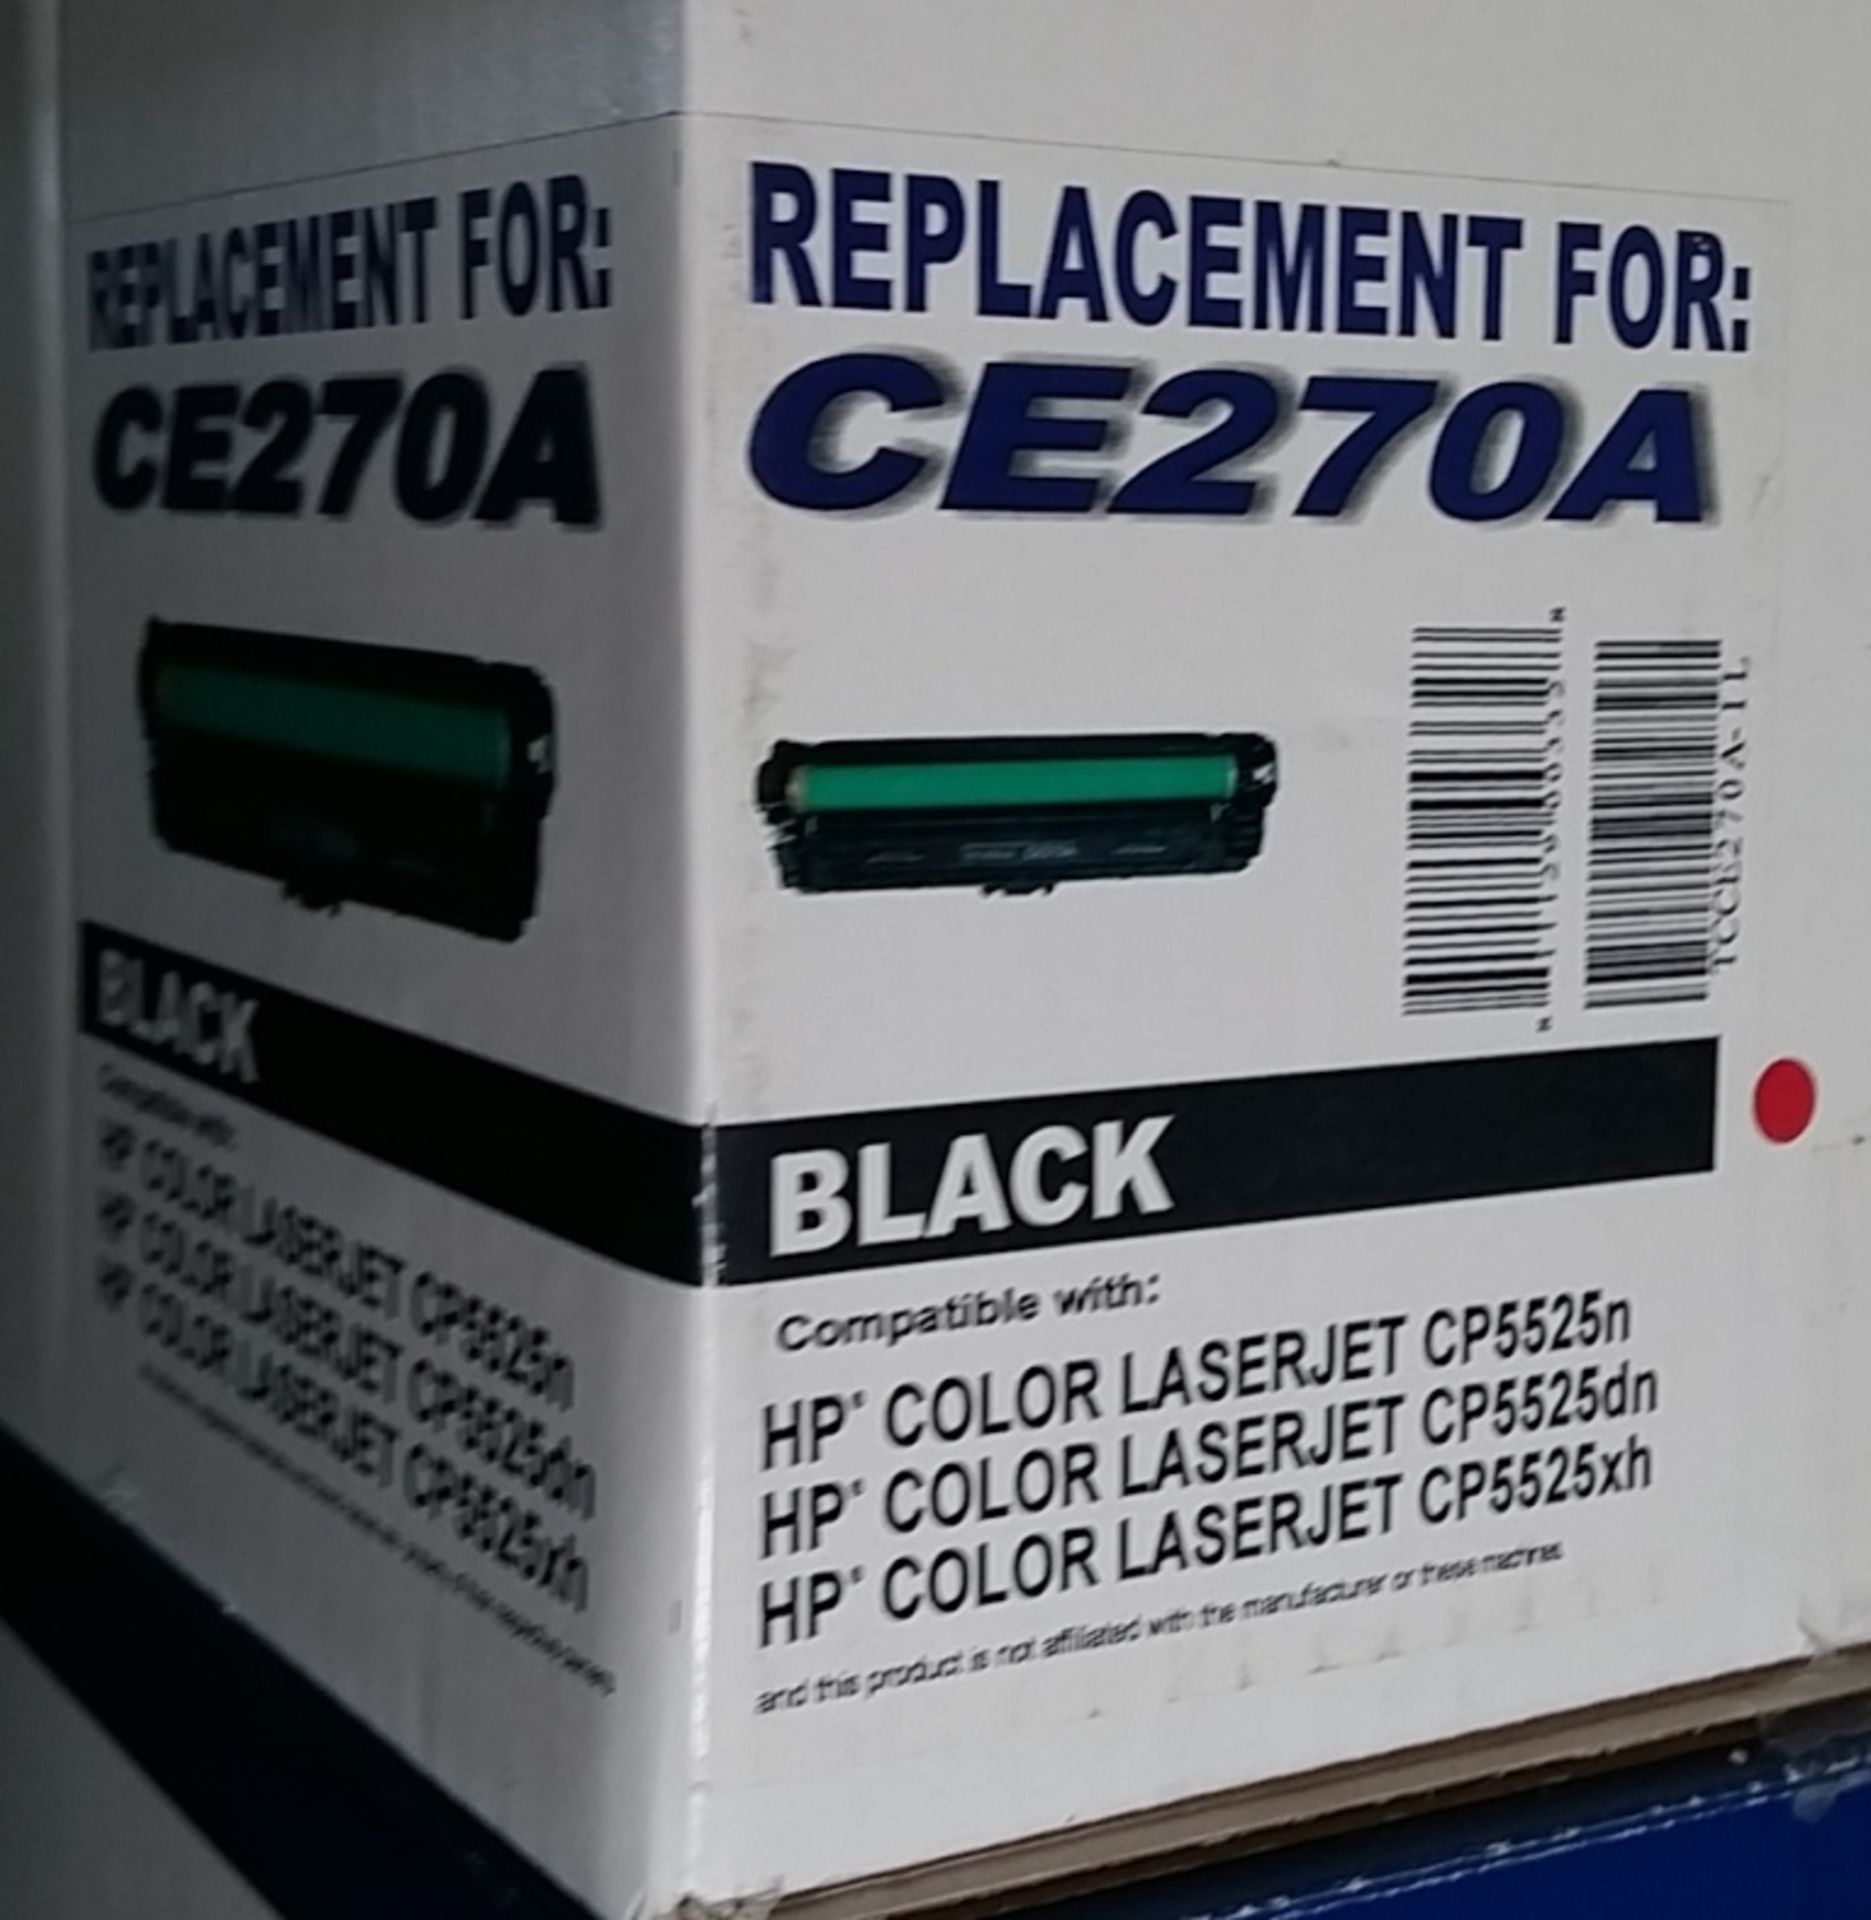 2x Replacement printer cartridges - black - CE270A - Image 2 of 3